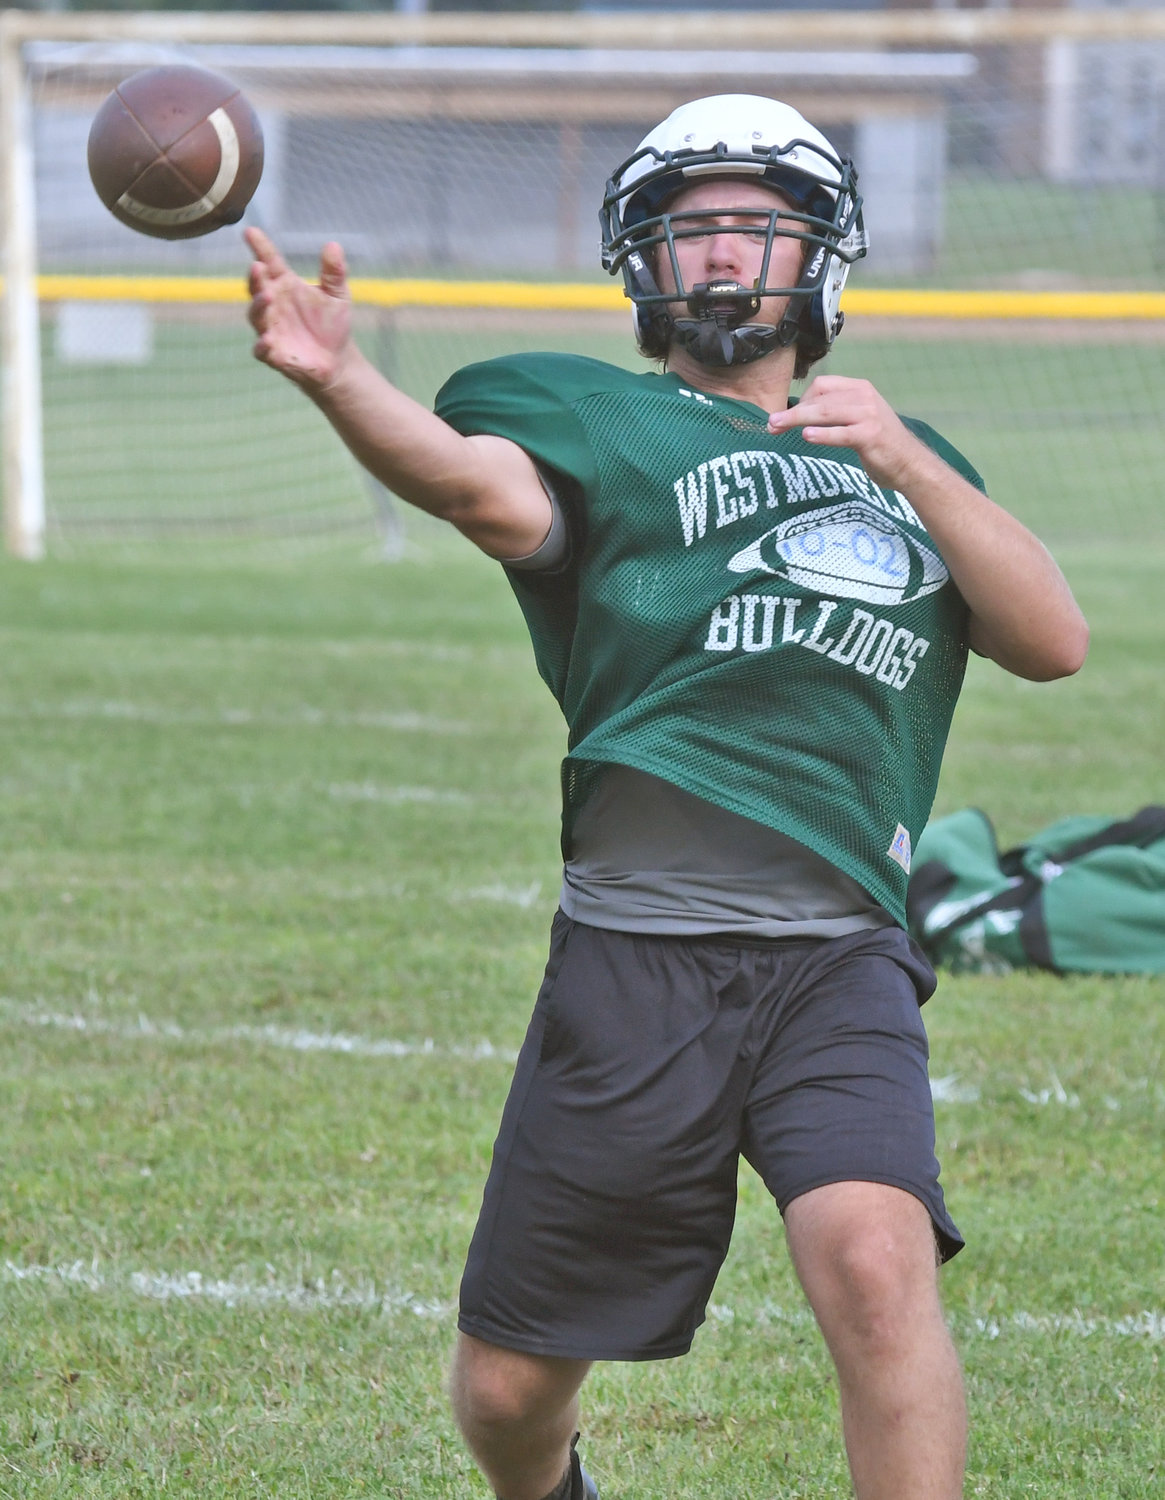 Bulldogs senior quarterback Mike Scalise, a three-year starter, makes a pass during morning drills on Aug. 25.